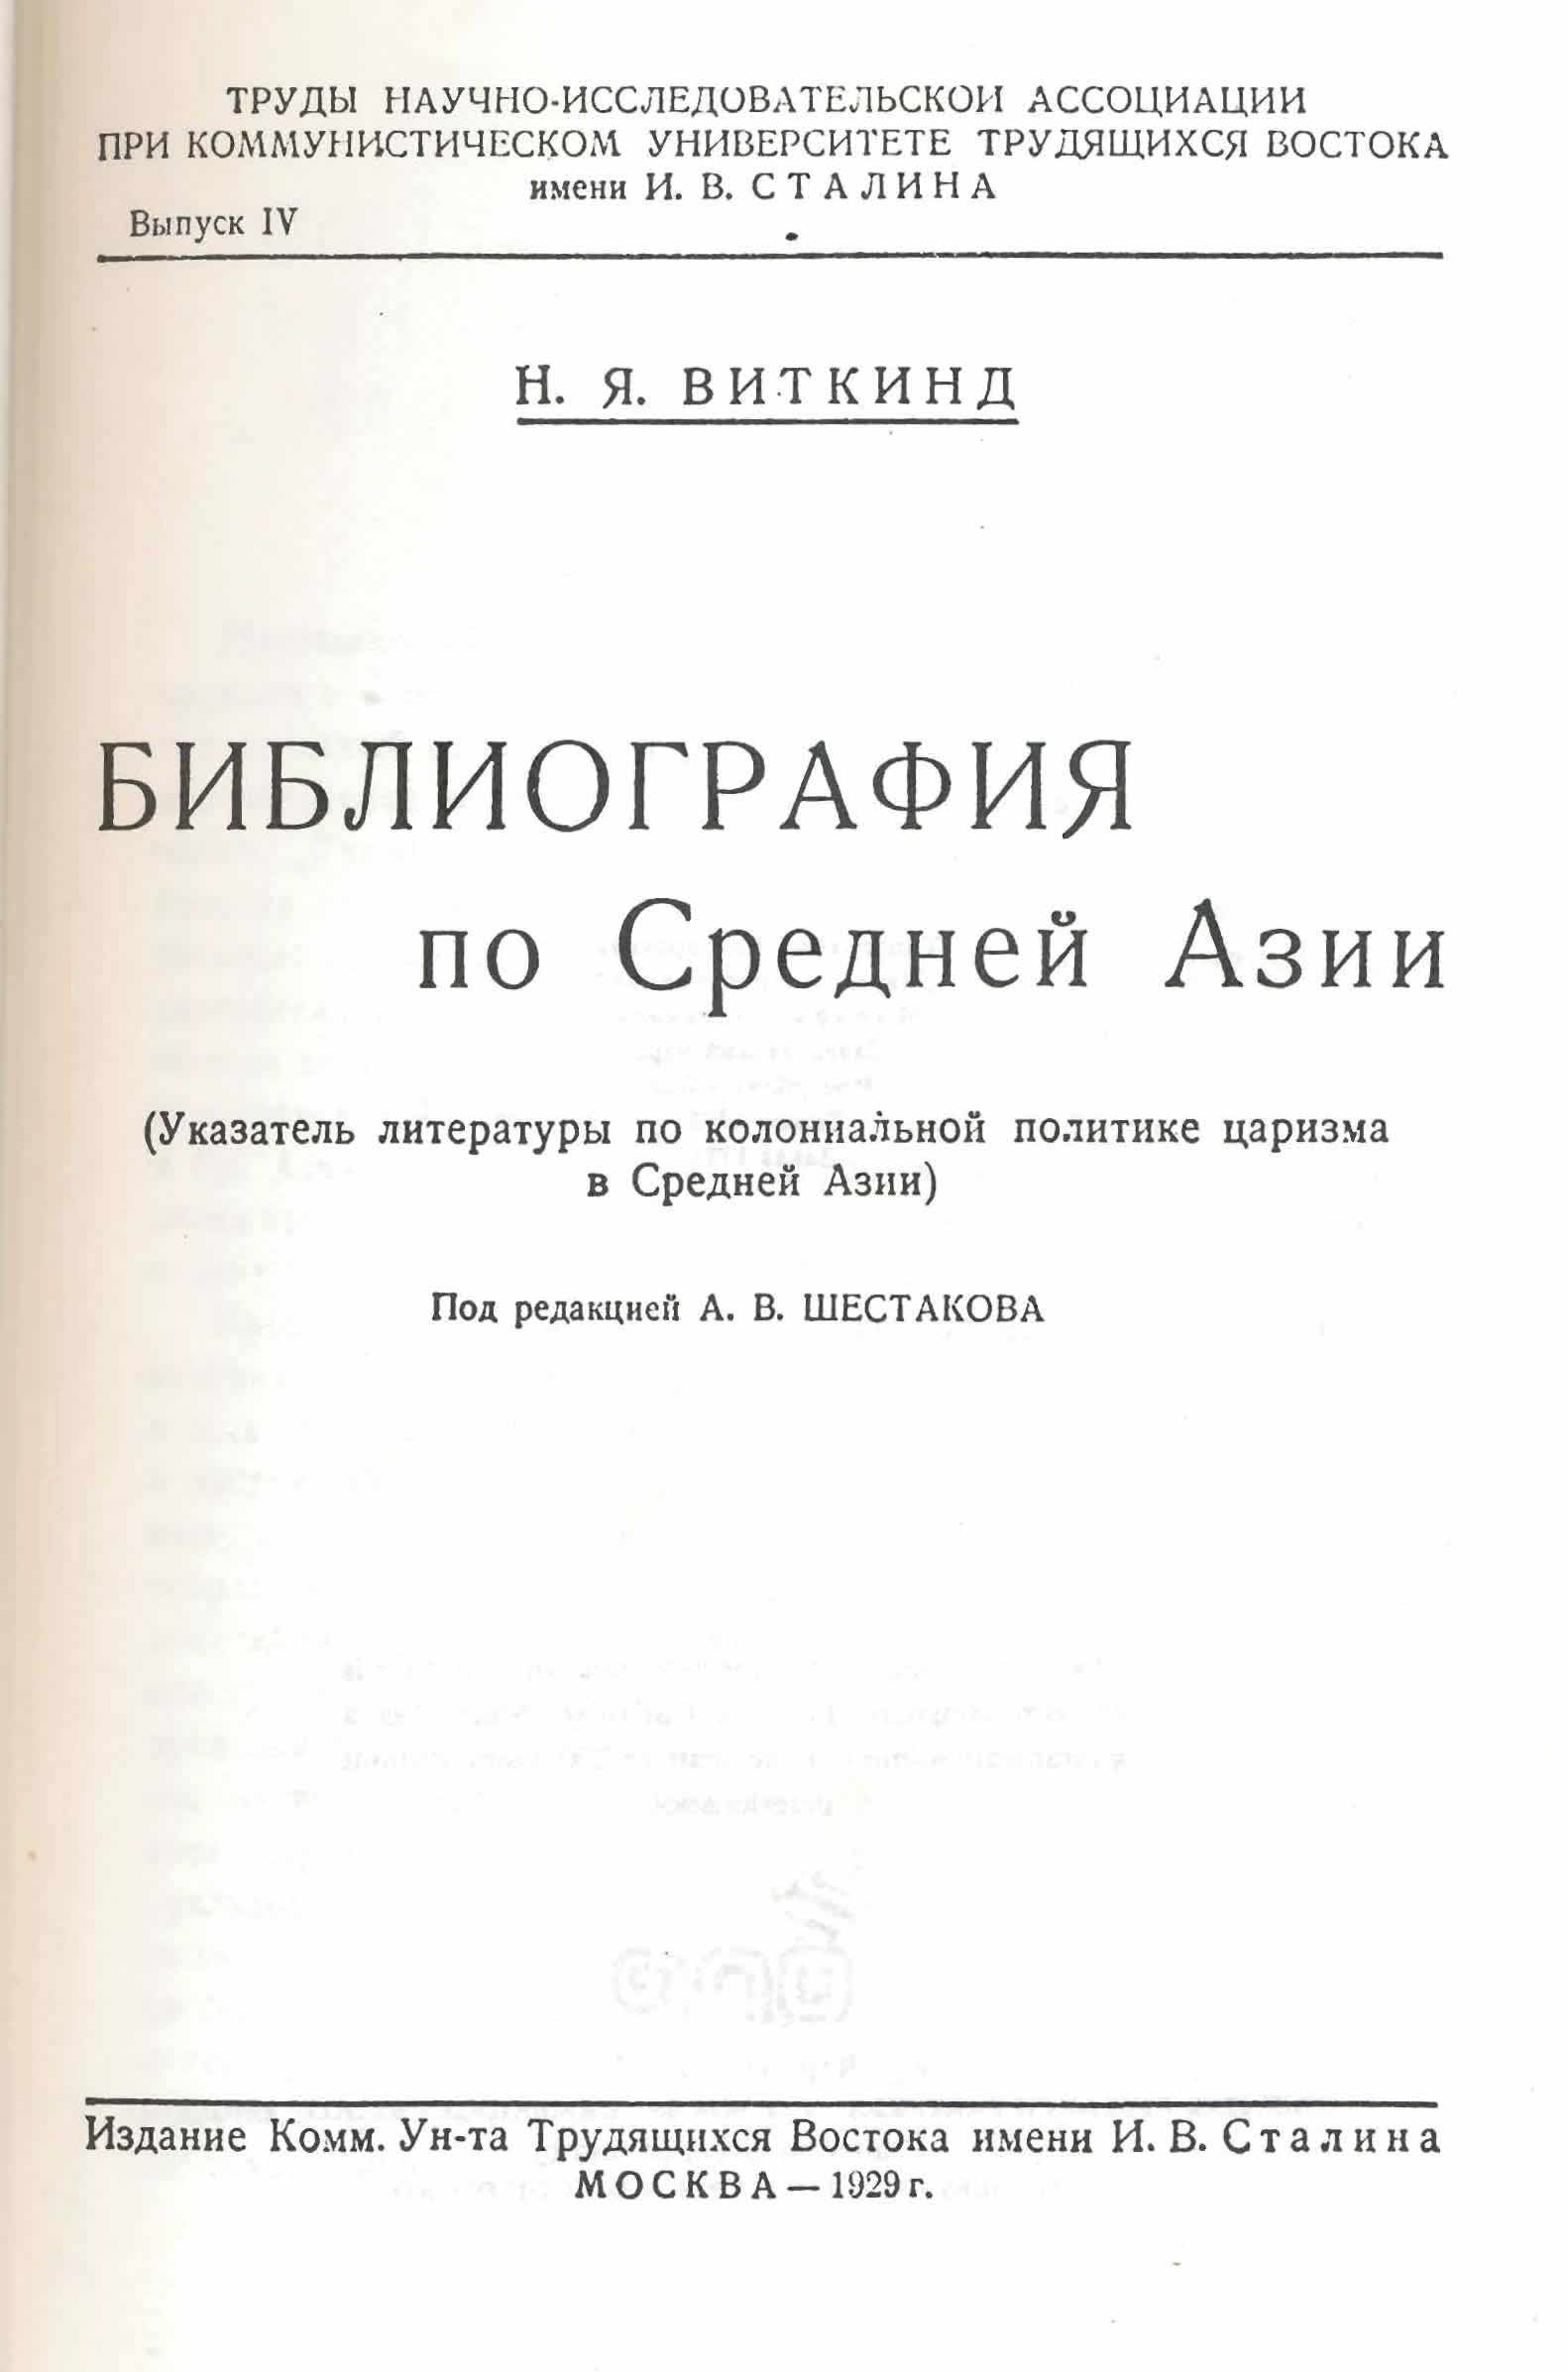 vitkind bibliography cover